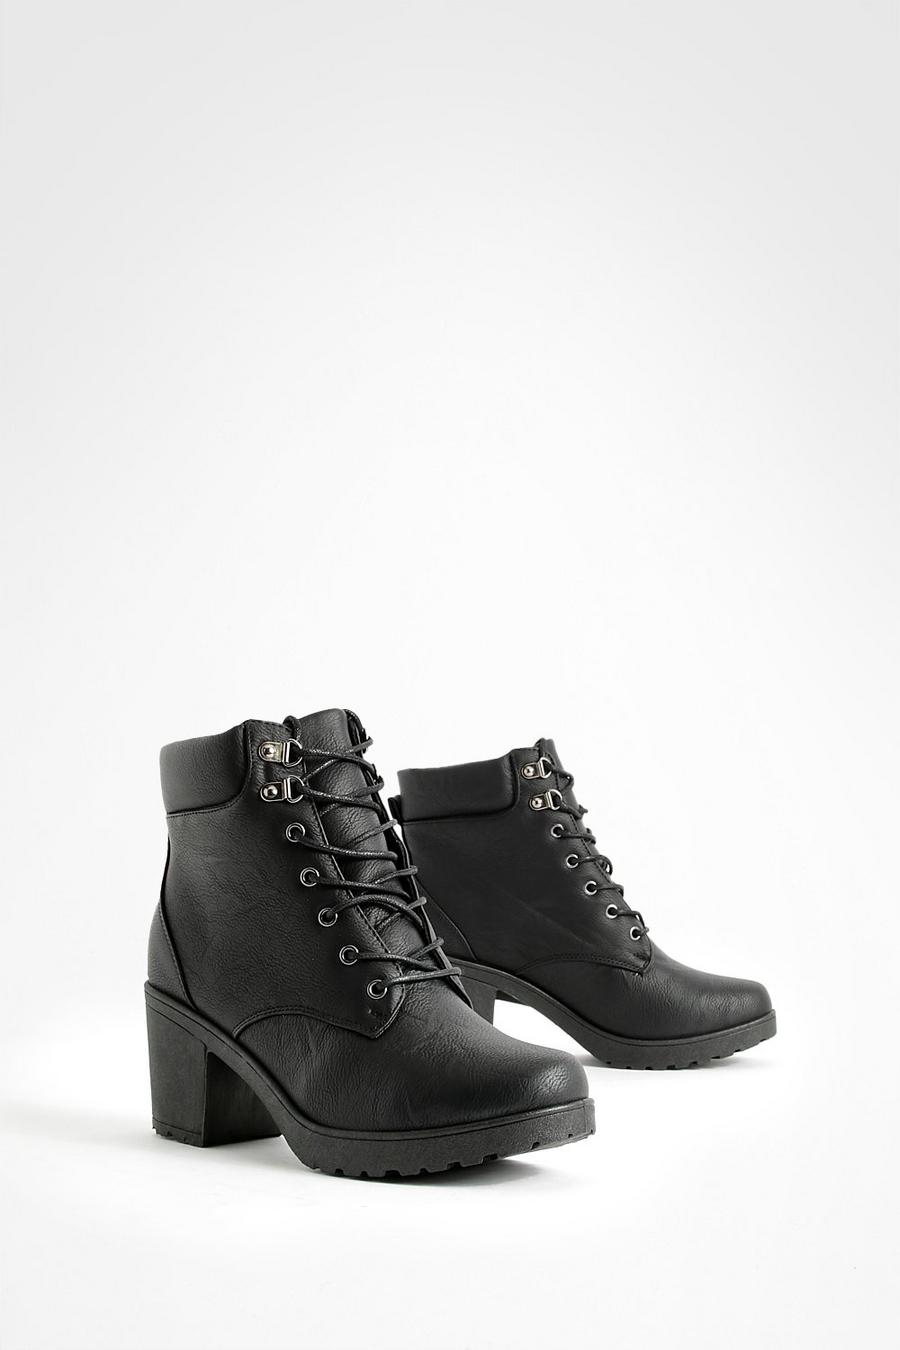 Black Wide Width Lace Up Heeled Combat Boots